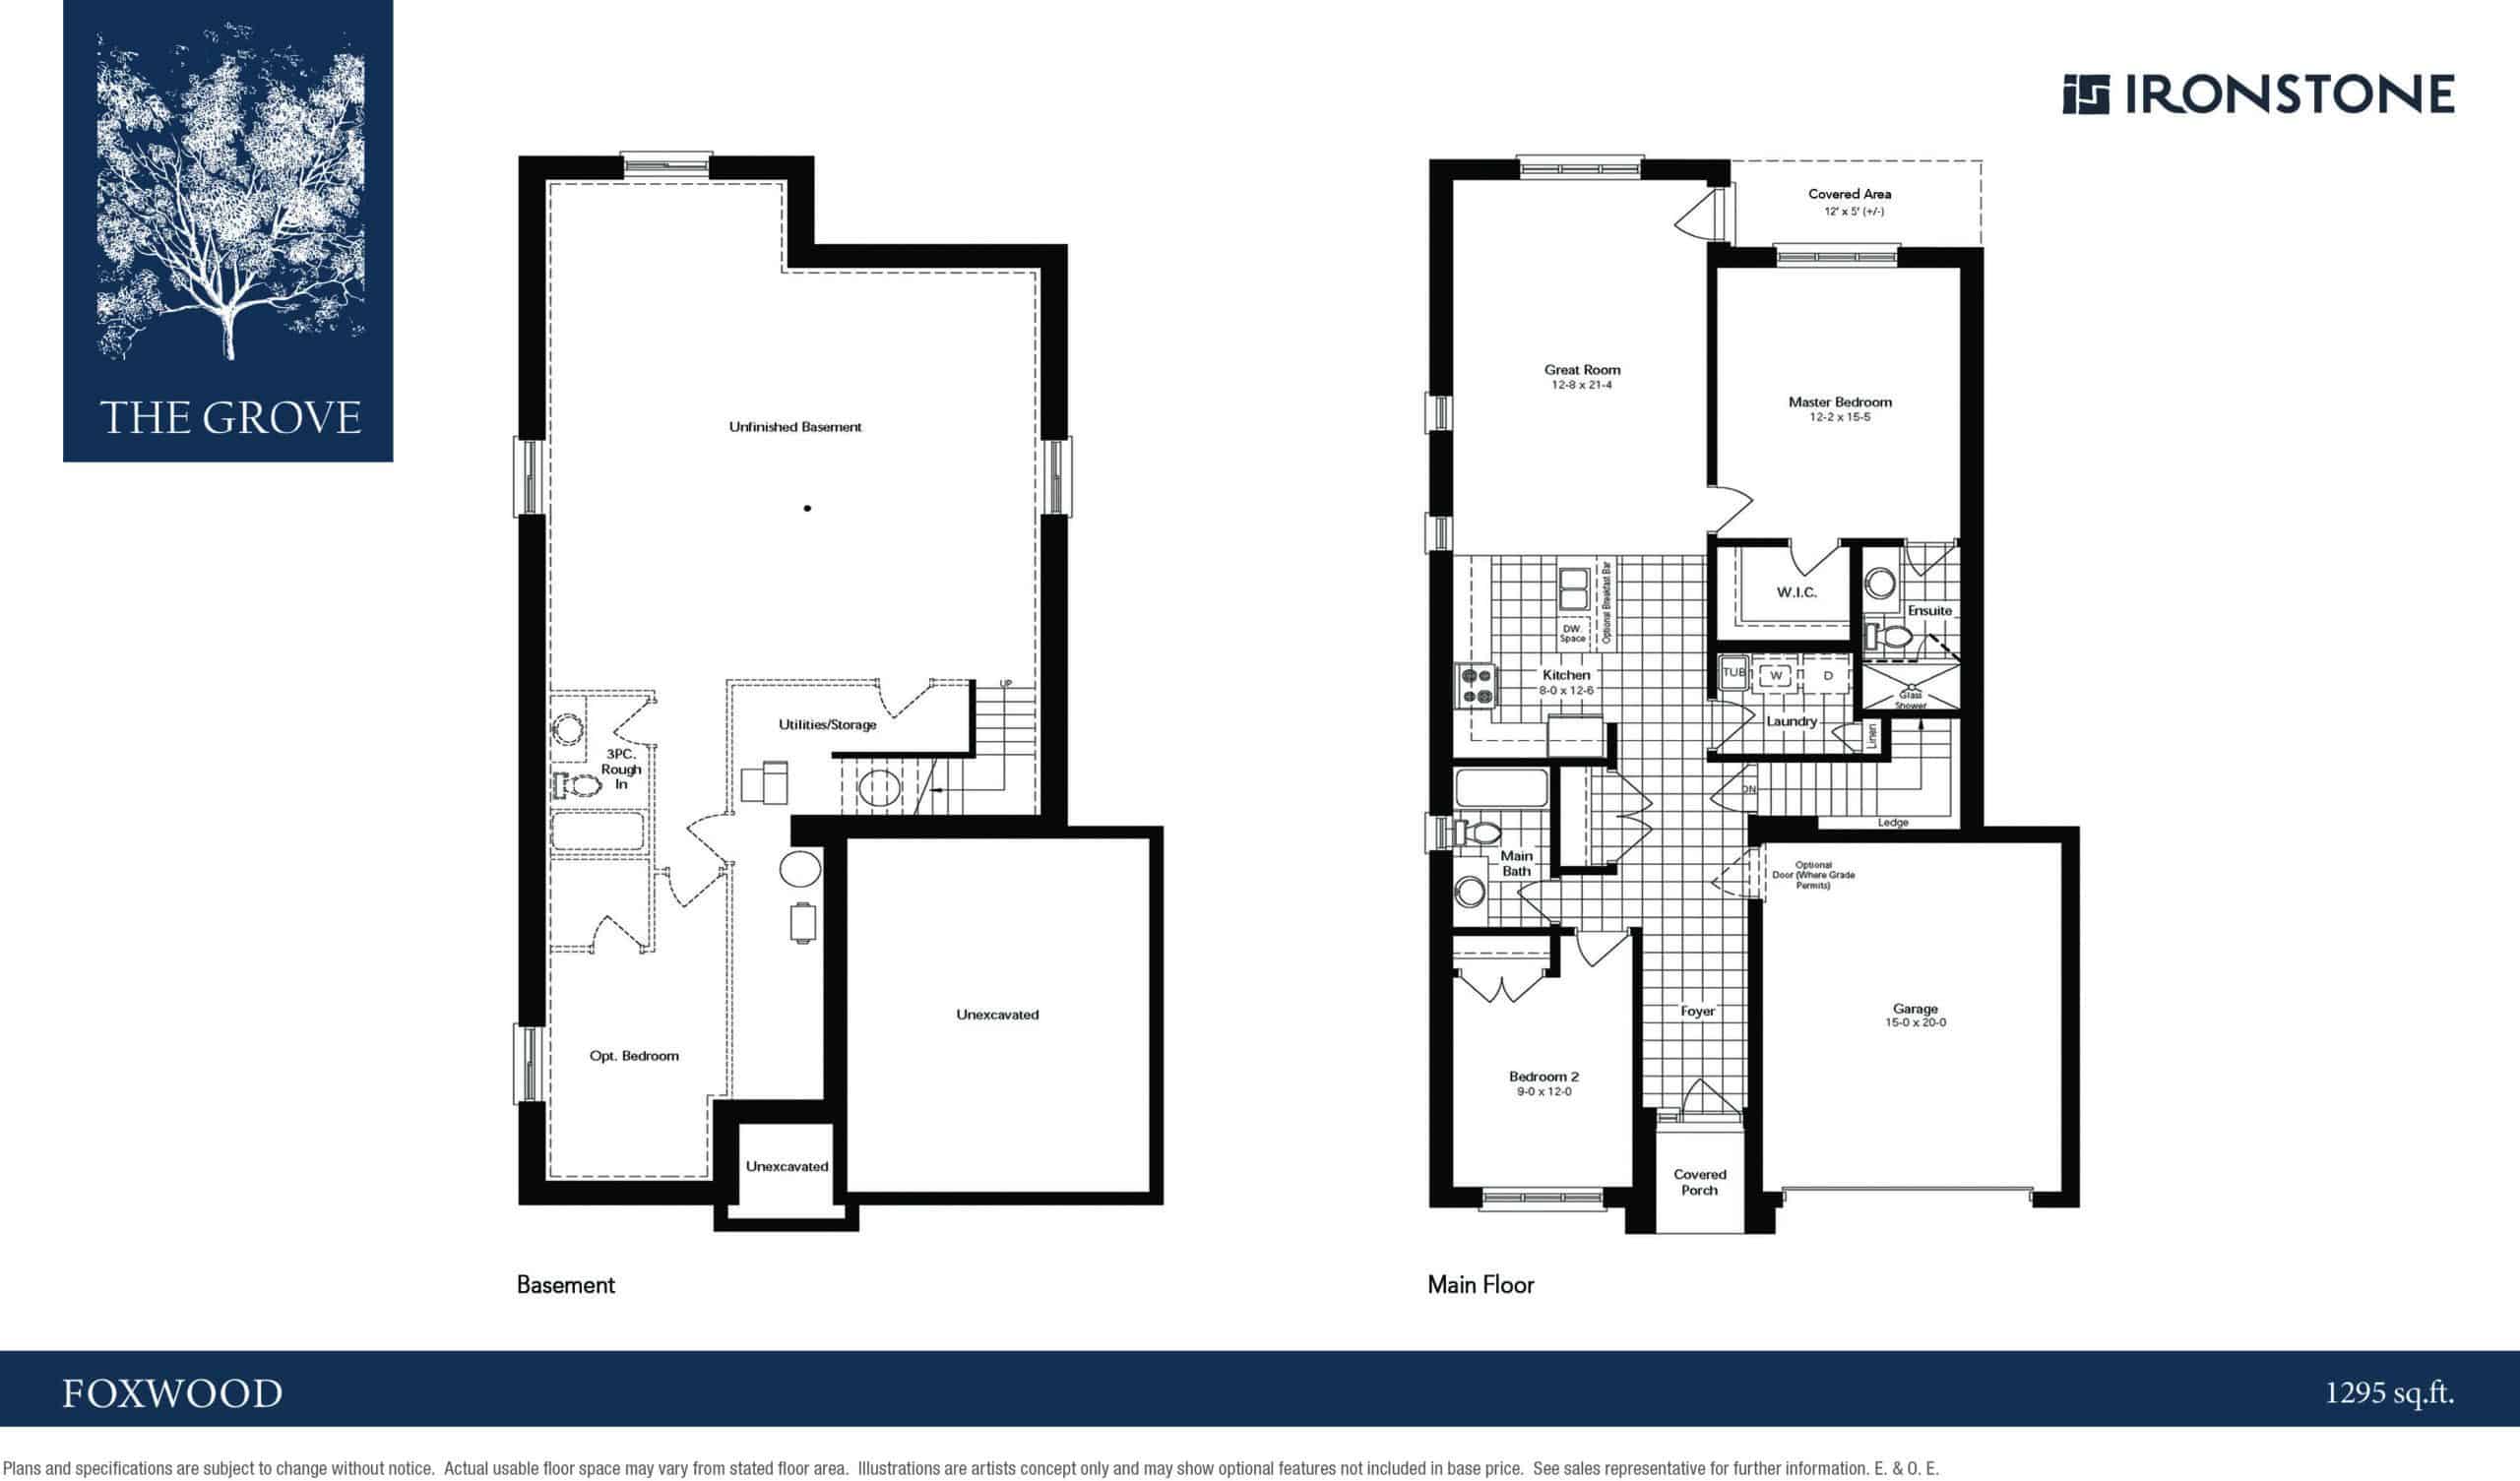  89 Christopher Court  Floor Plan of  The Grove with undefined beds